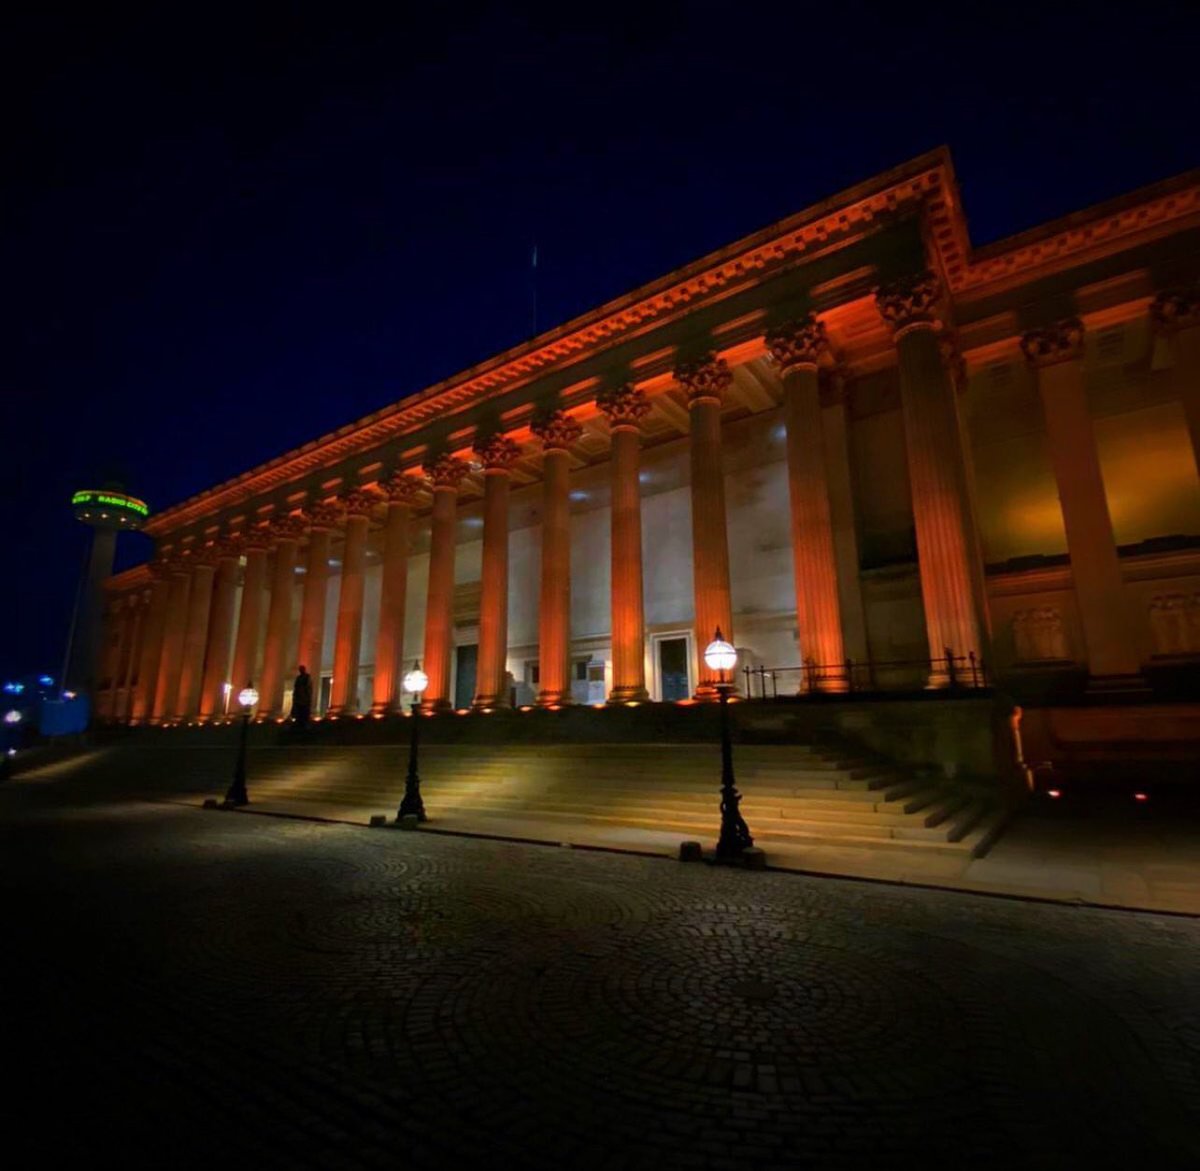 The following buildings will be lit in orange, Megan's favorite colour. We hope you can find time to reflect & remember 🧡 The Royal Liver Building Liverpool Town Hall St. George's Hall The Cunard Building St. John's Beacon The George's Dock Building The Mersey Gateway Bridge